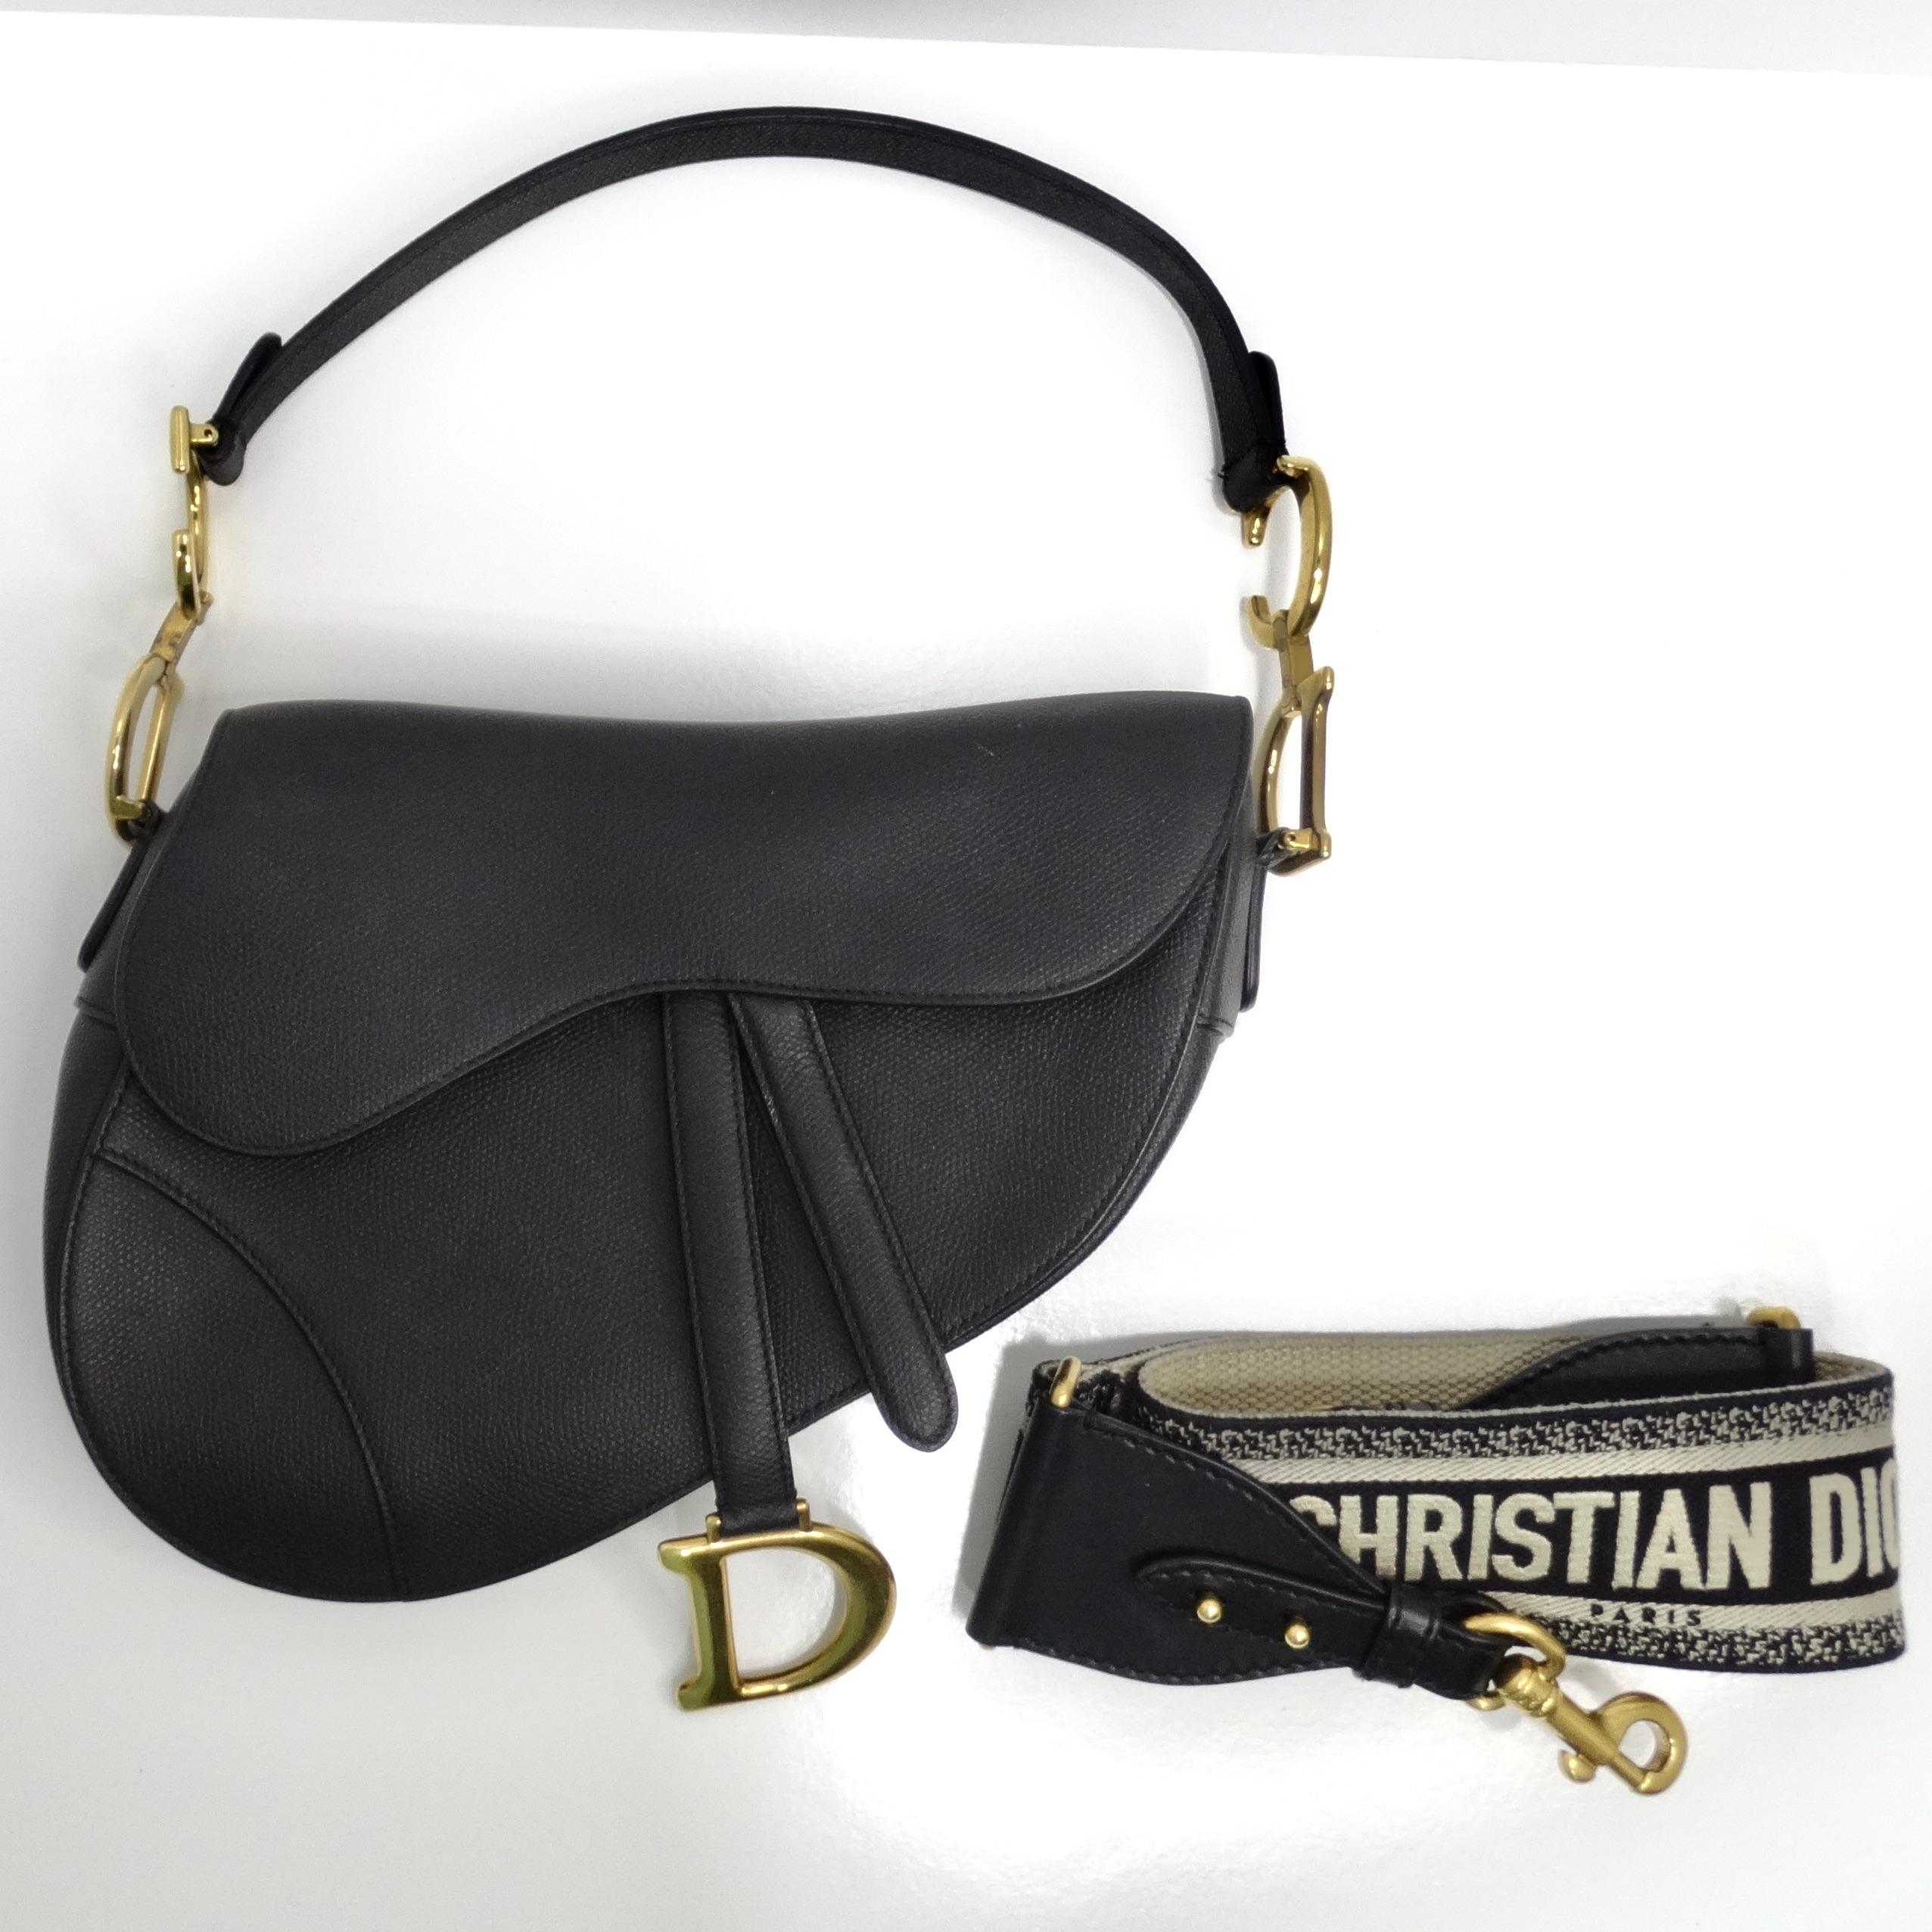 Introducing the Christian Dior Medium Saddle Bag in Black Calfskin, a timeless icon of luxury fashion. Crafted from grained calfskin leather in the iconic saddle shape, this bag exudes sophistication and elegance.

The bag features gold-tone CD